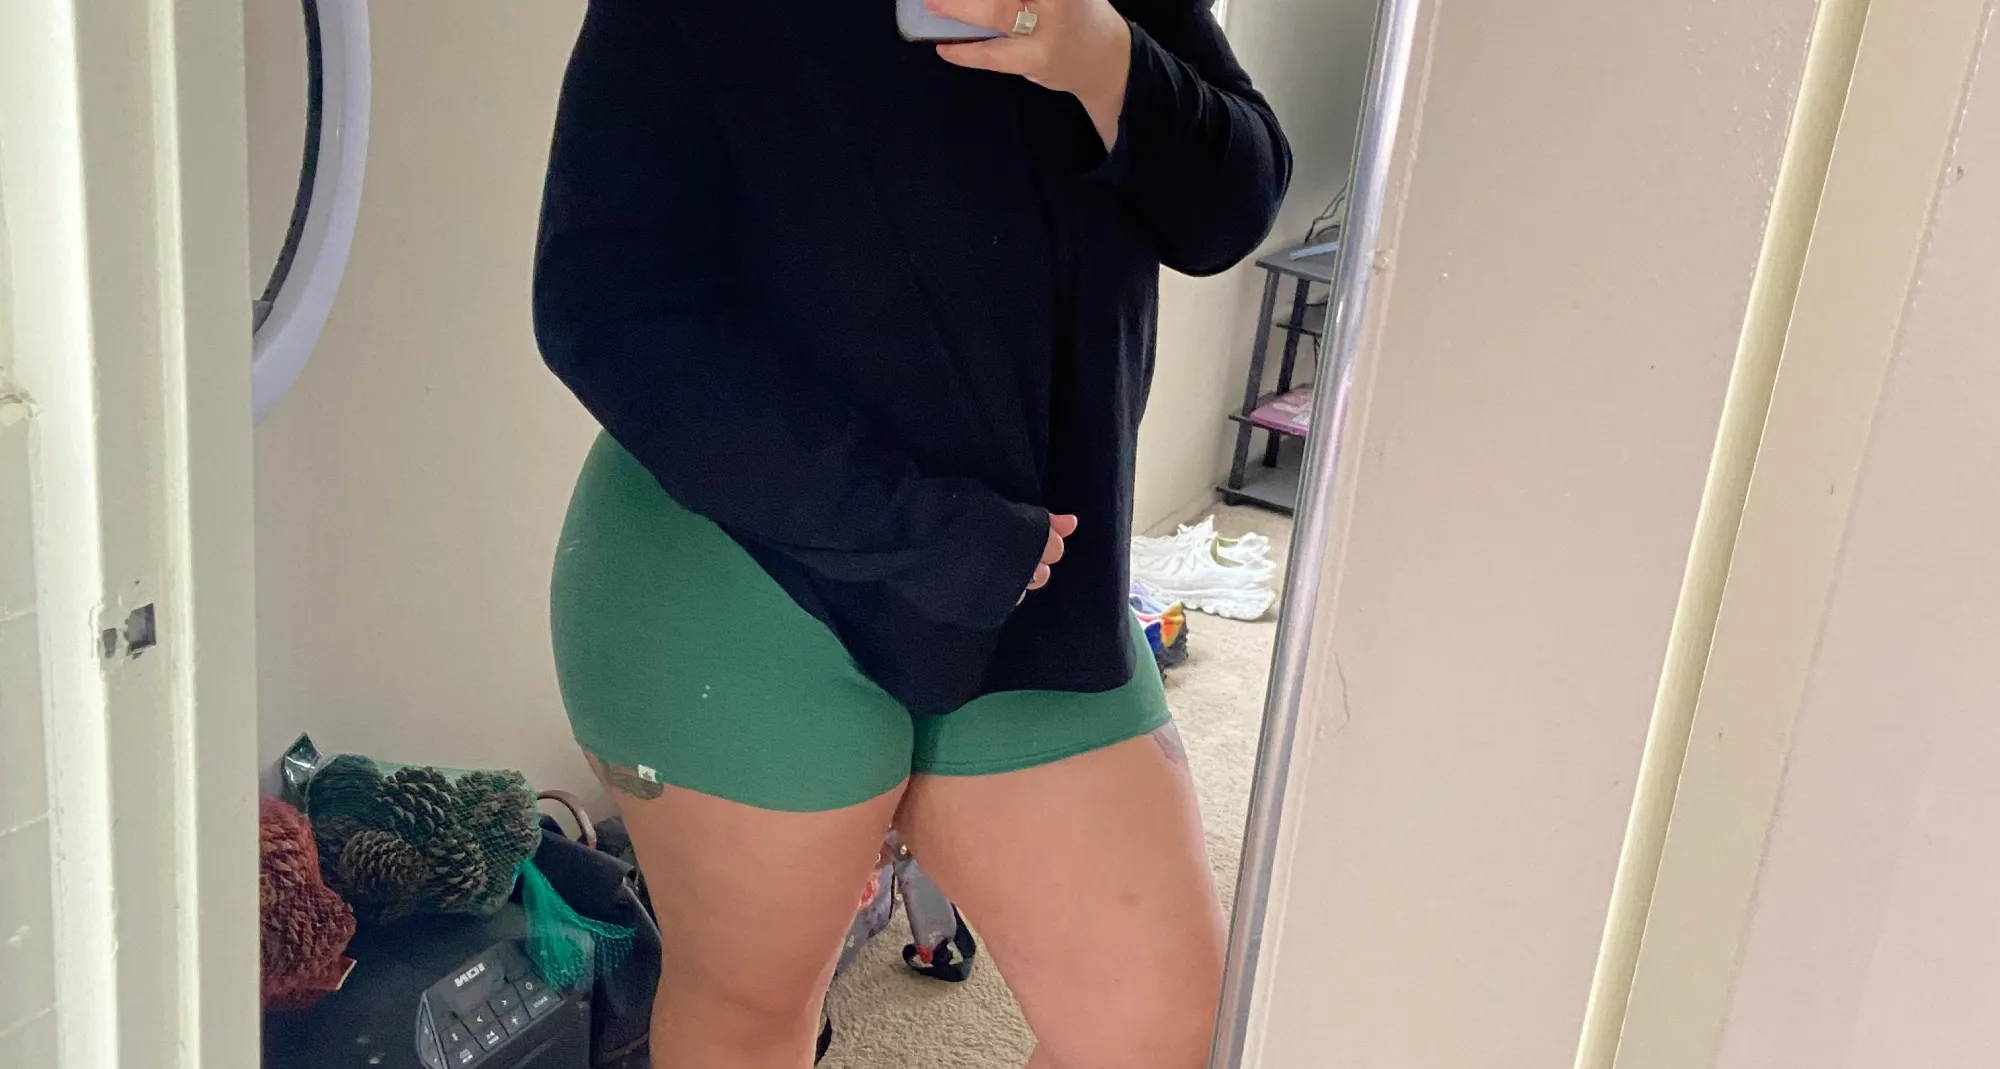  woman taking a mirror selfie with her phone wearing a black sweatshirt and green boy shorts